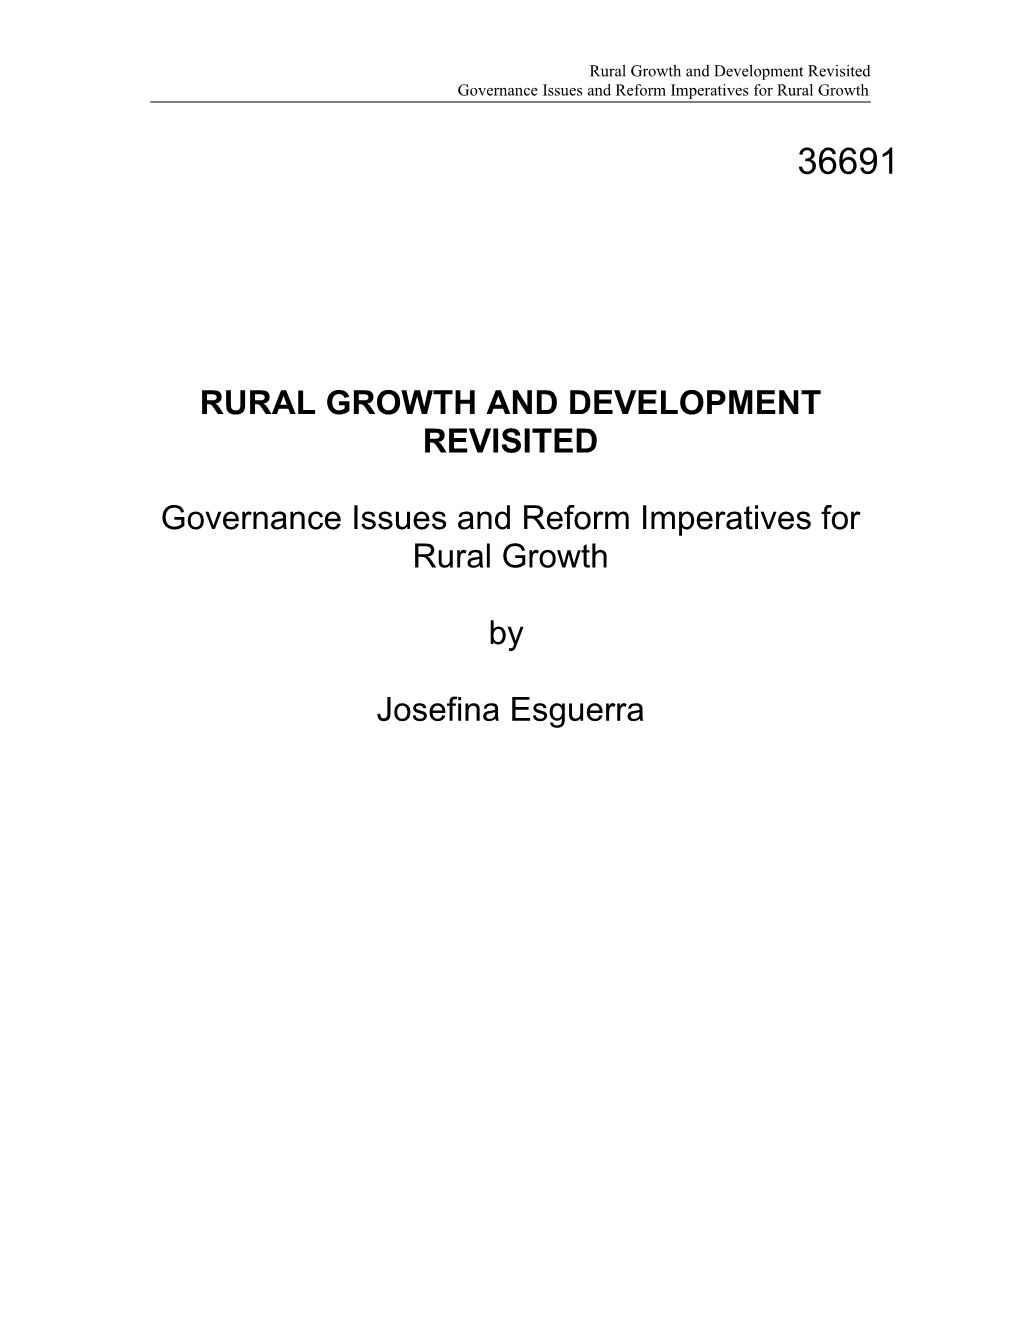 The Role of Better Governance in Promoting Rural Growth